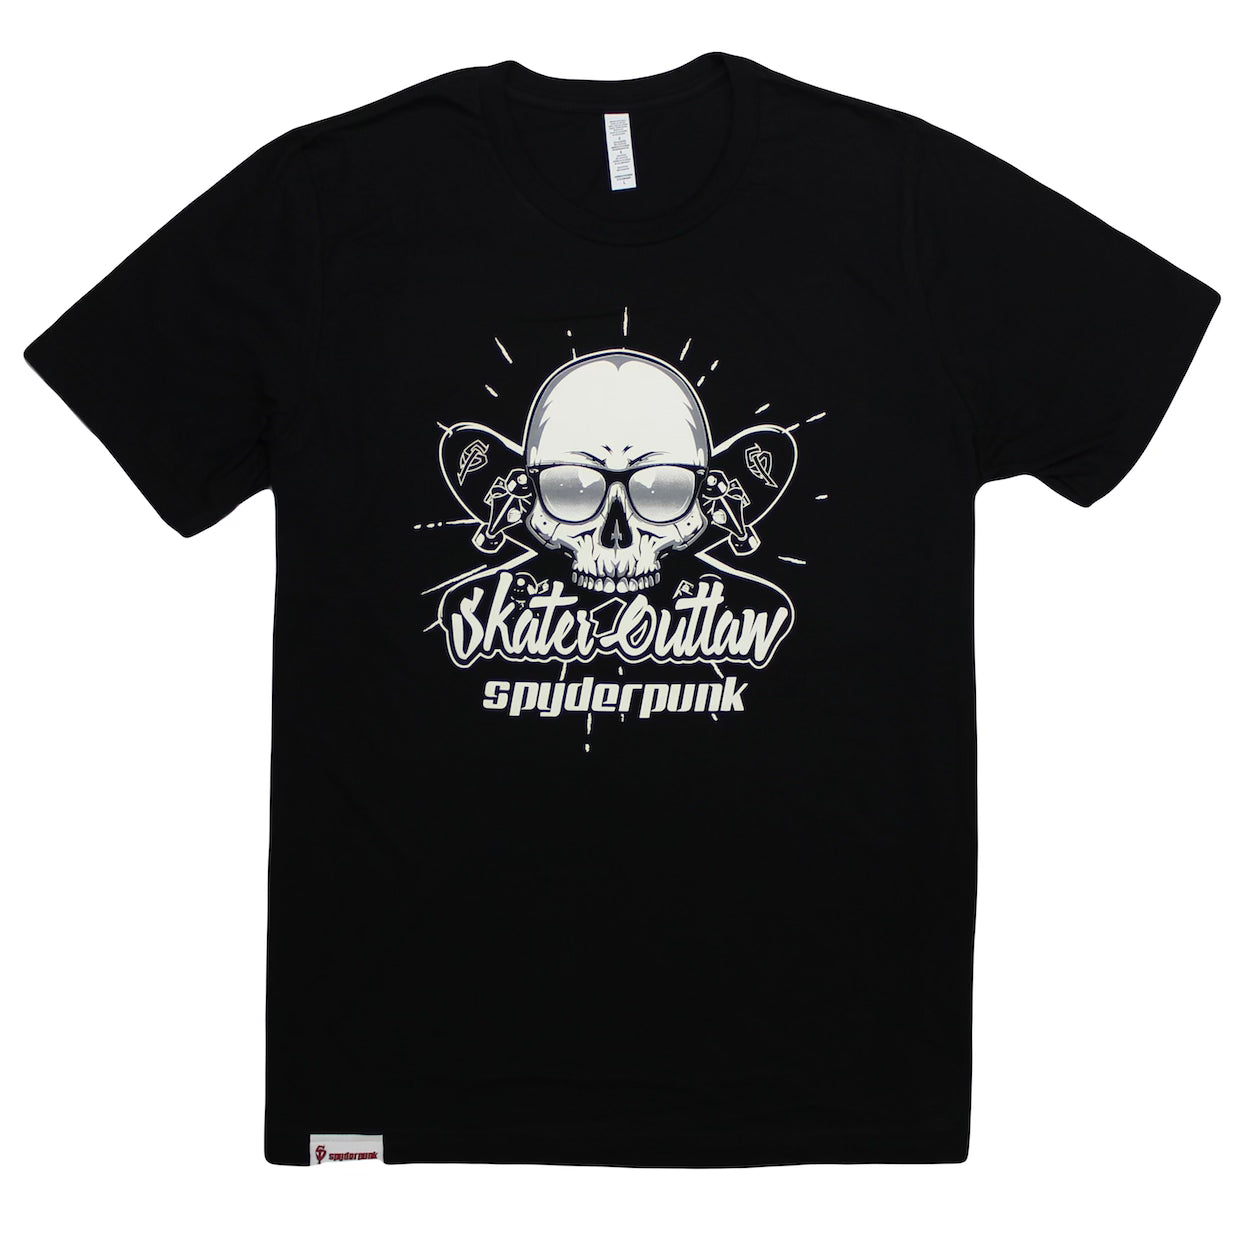 Graphic T Shirt Custom Design Printed Skater Outlaw With Hem tag For Authenticity